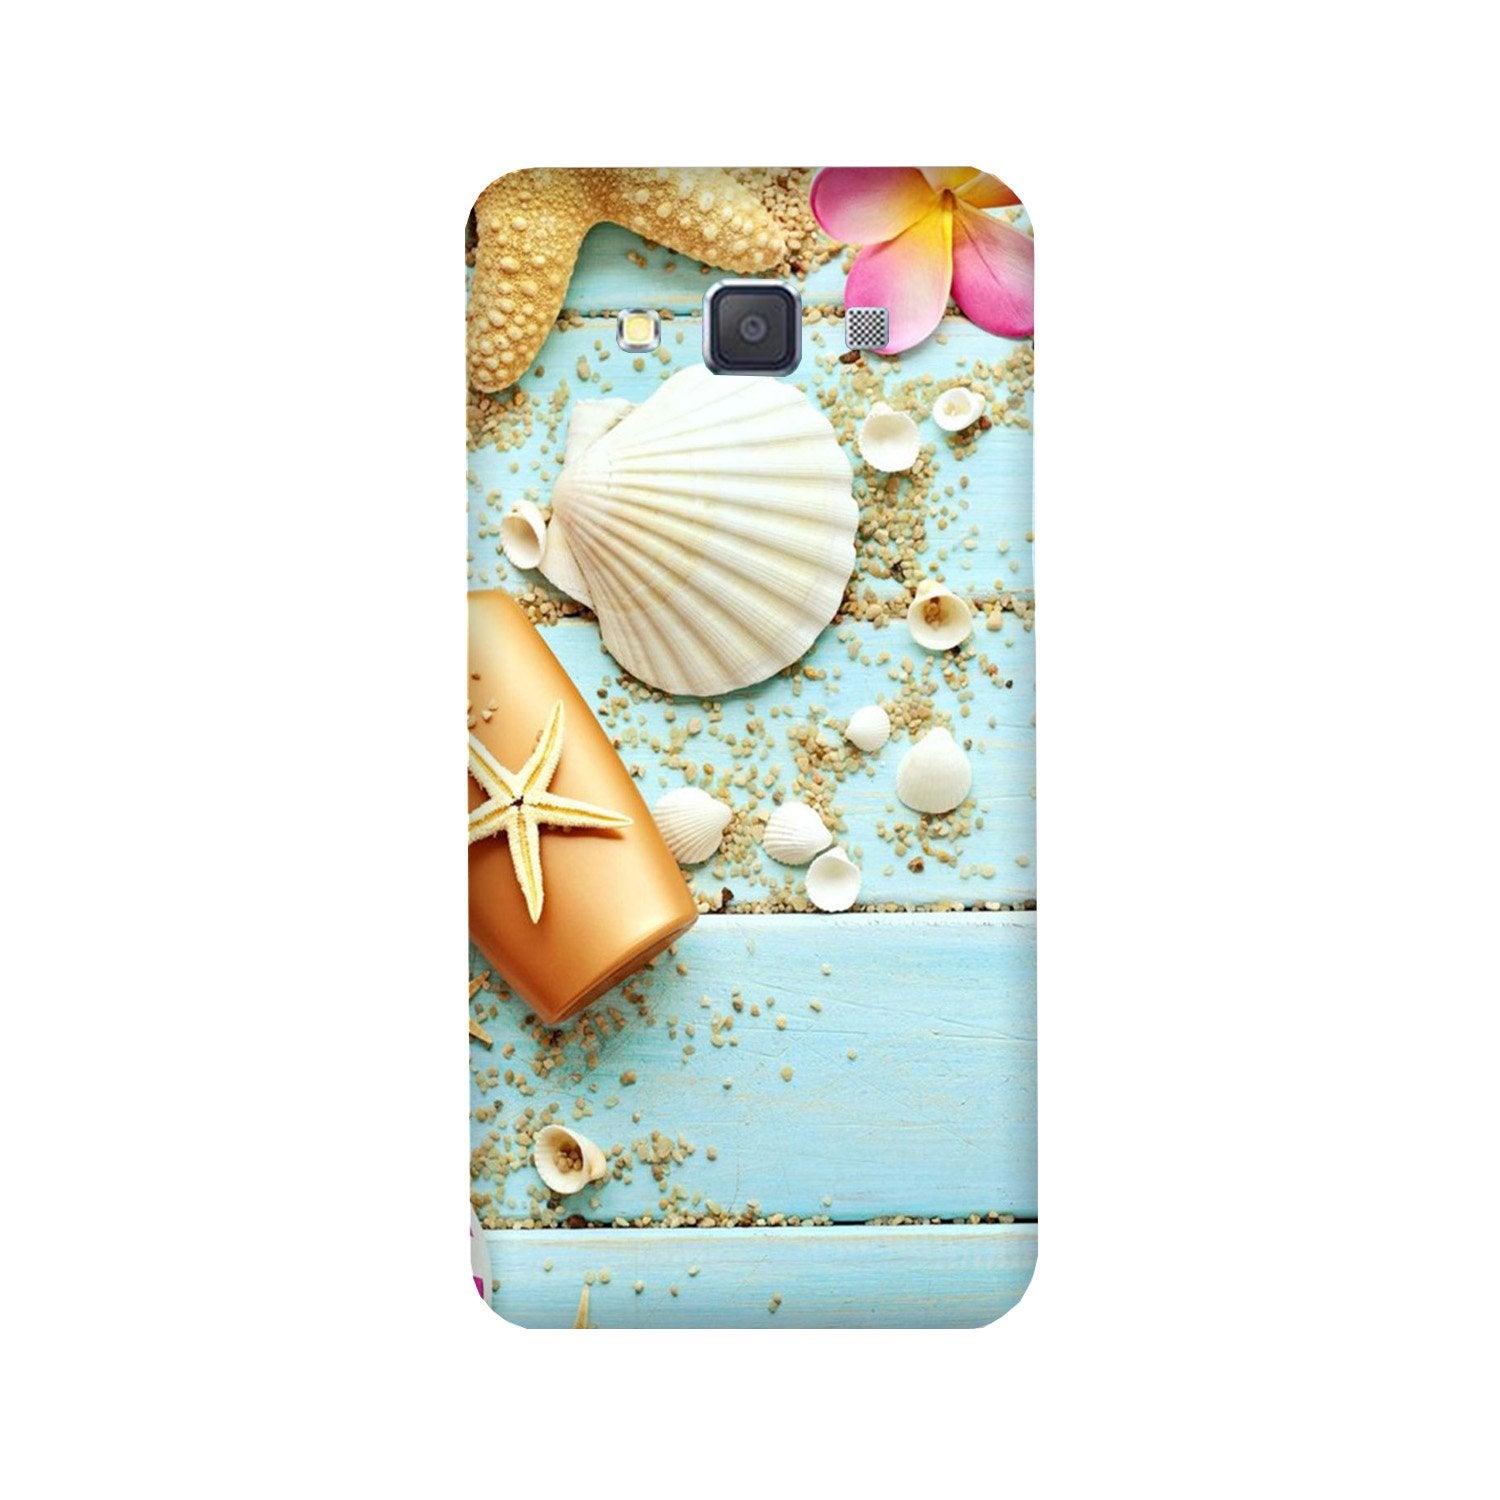 Sea Shells Case for Galaxy ON7/ON7 Pro